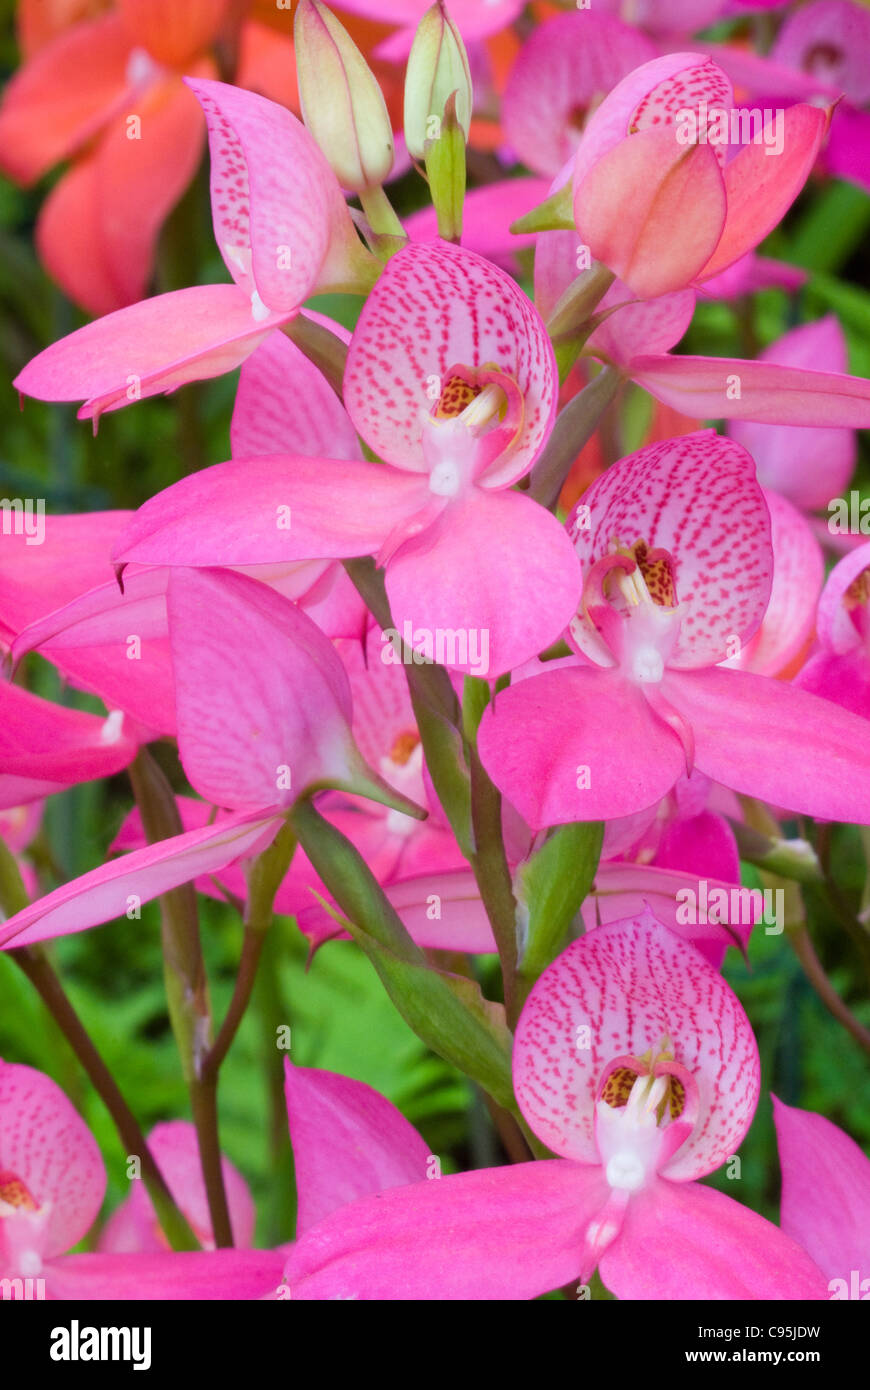 Hardy Orchid South African Table Mountain Orchid Disa watsonii ‘Sandra’, terrestrial orchid species, pink flower blooms Stock Photo